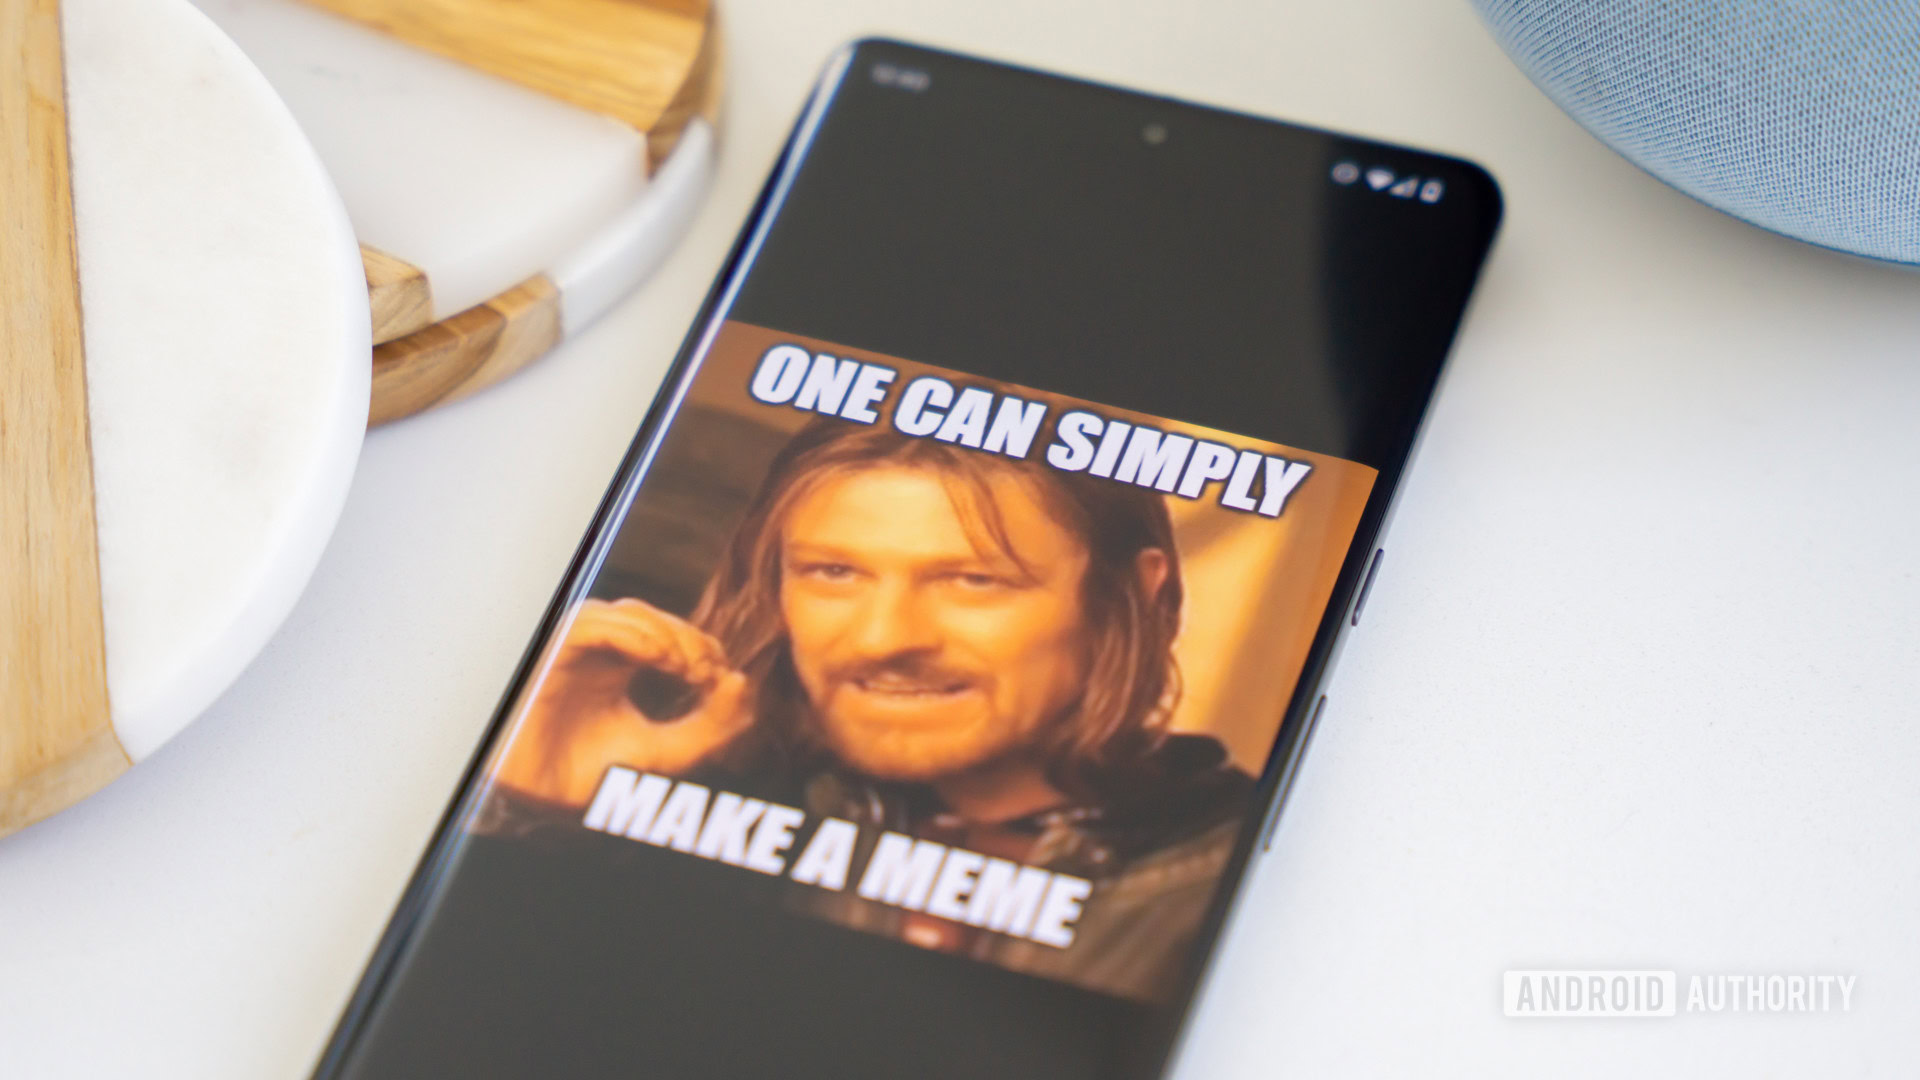 How to Make Memes on Android